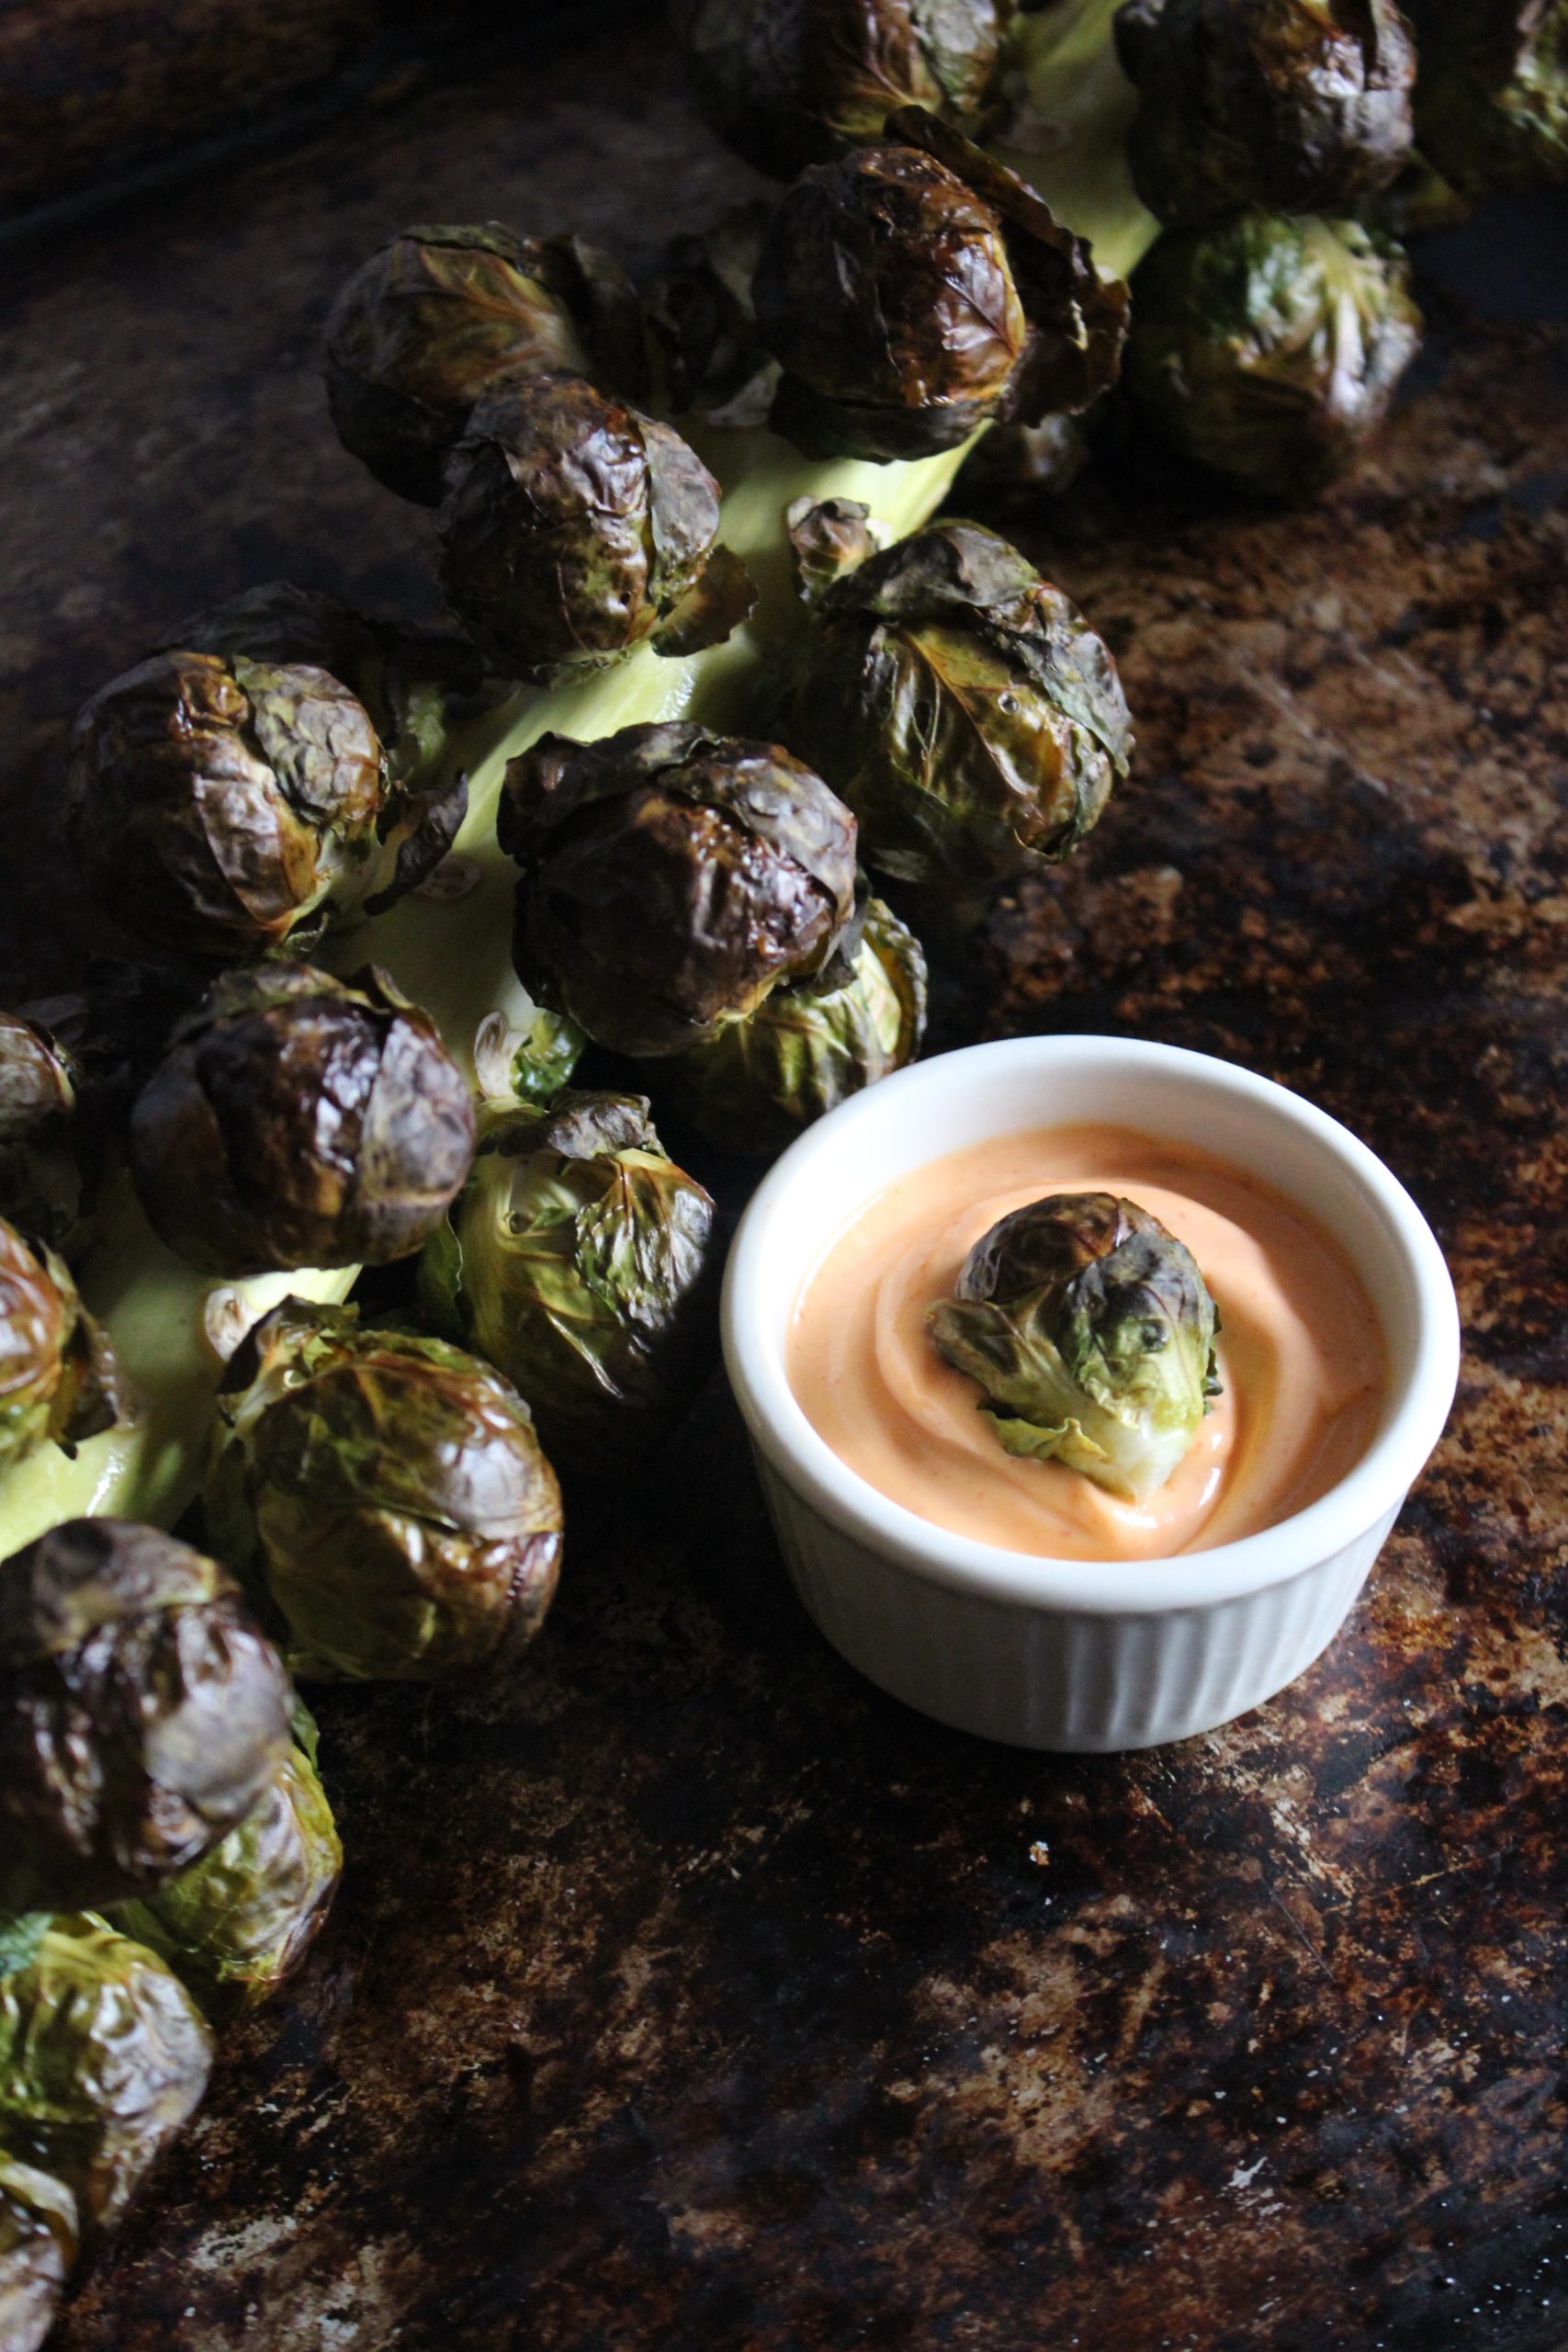 Roasted Brussel Sprouts on the Stalk